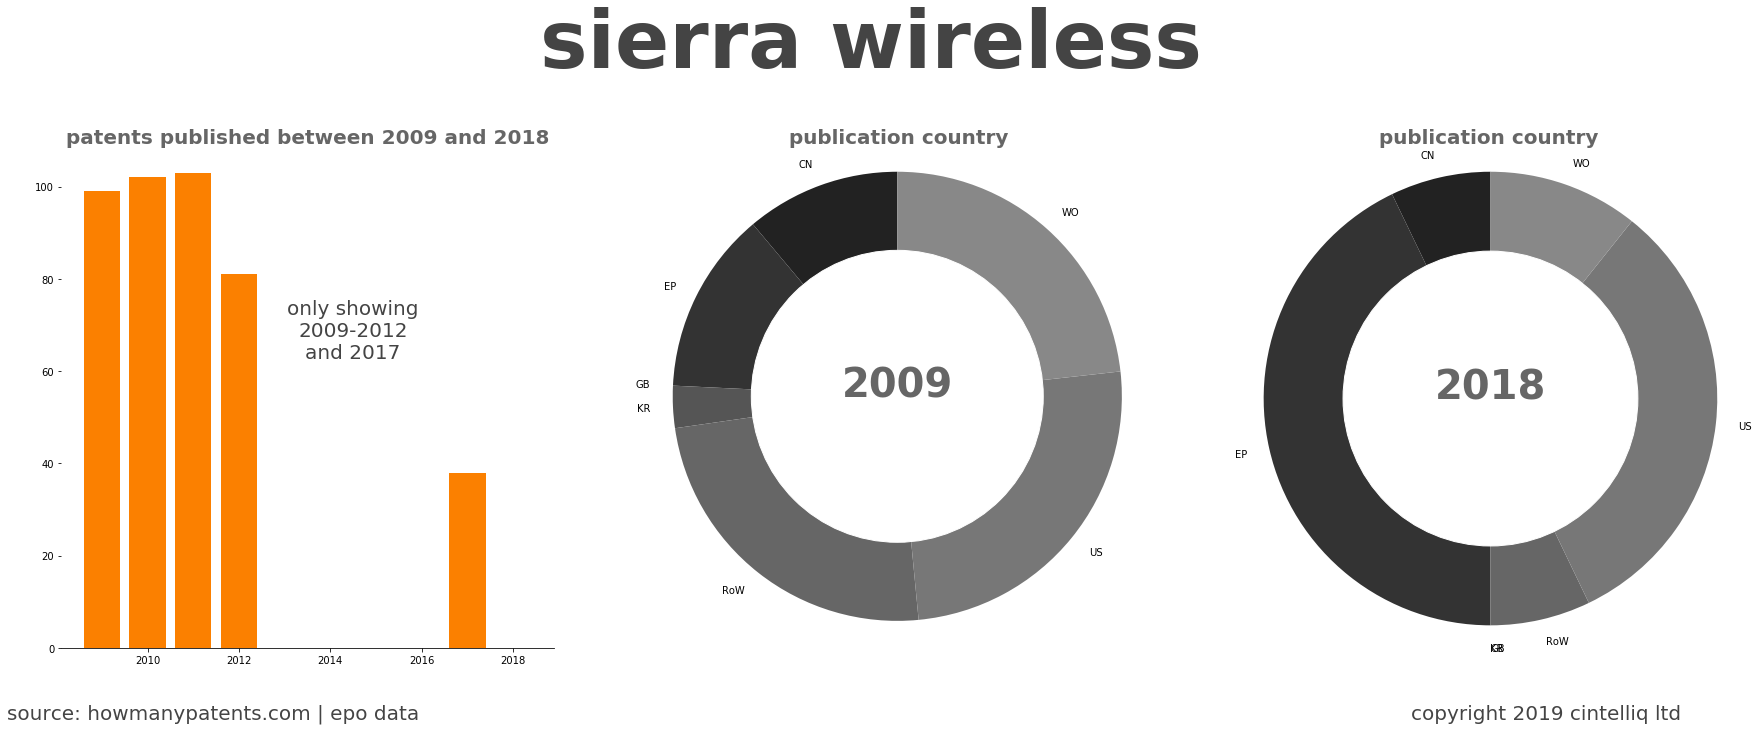 summary of patents for Sierra Wireless